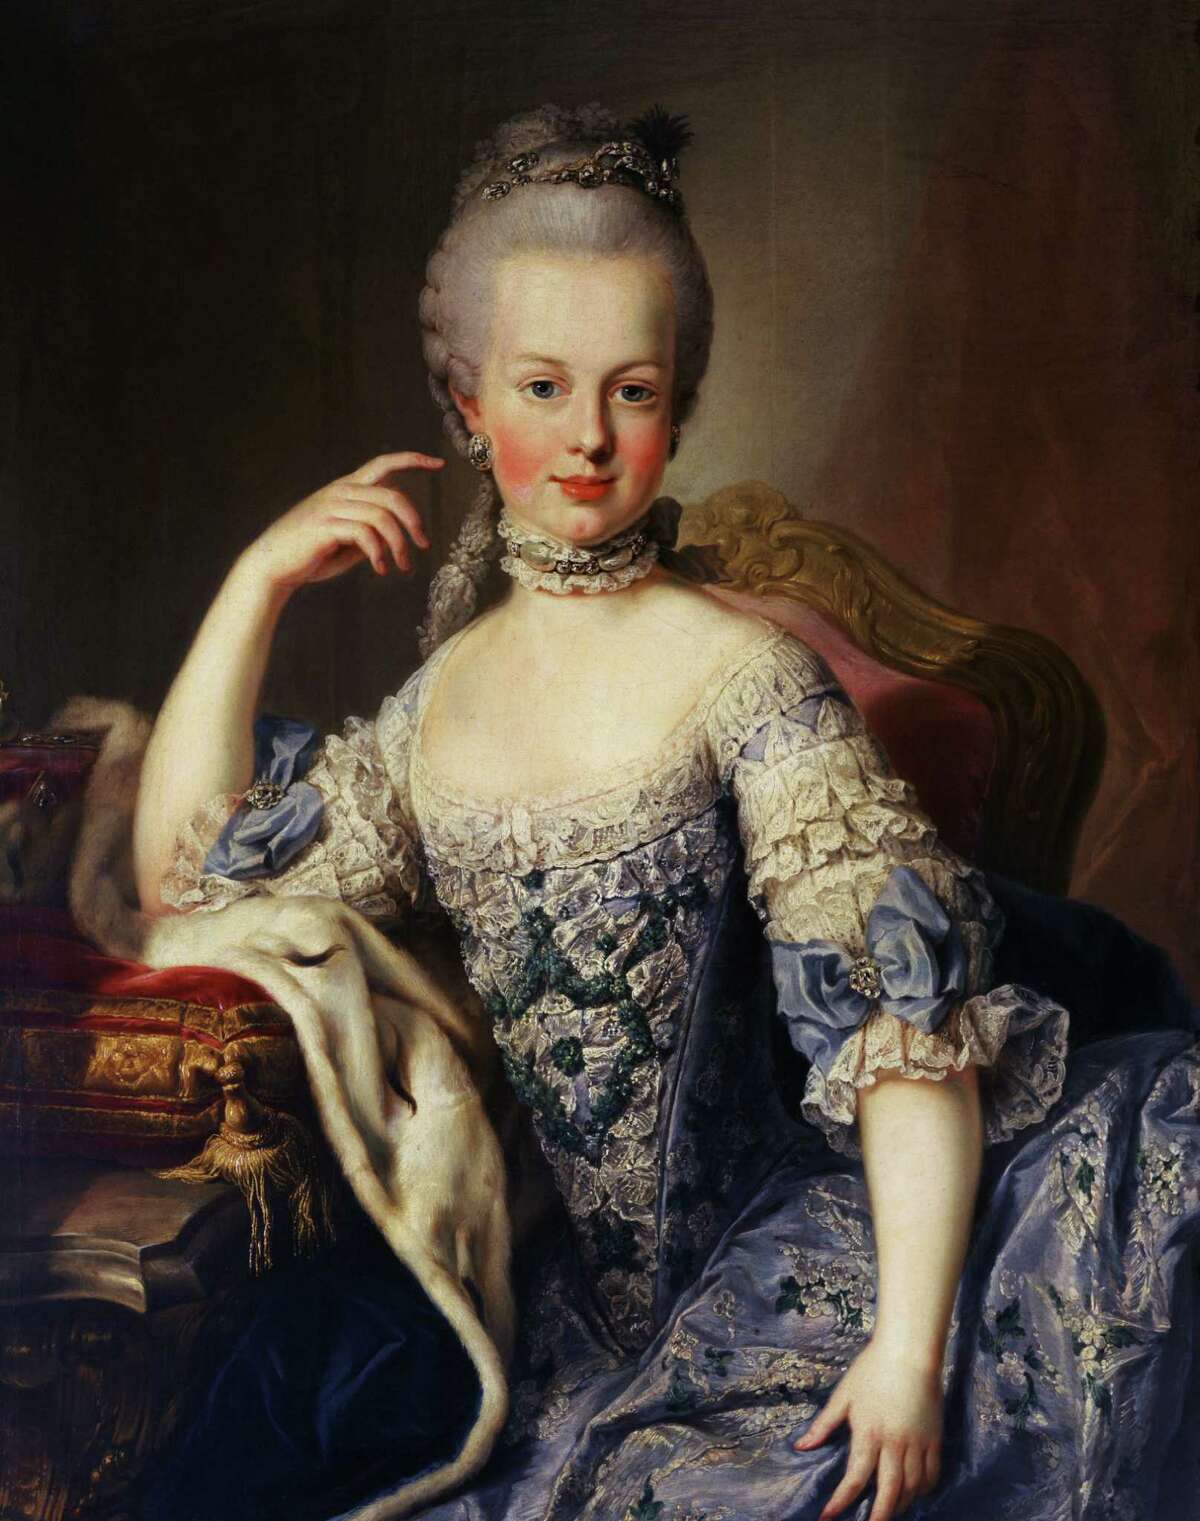 ca. 1768 --- Portrait of Archduchess Marie-Antoinette --- Image by Â Ali Meyer/CORBIS Portrait of Archduchess Marie-Antoinette, 1767-68, by Martin van Meytens the Younger, Schonbrunn, Vienna. For Zest story on Houston Ballet's world premiere production of Marie, based on the life of Marie Antoinette. In cooperation with the ballet, Houston PBS Channel 8 will air a two-hour documentary on Marie Antoinette at 10 p.m. Monday, Feb. 23. Â Ali Meyer/CORBIS